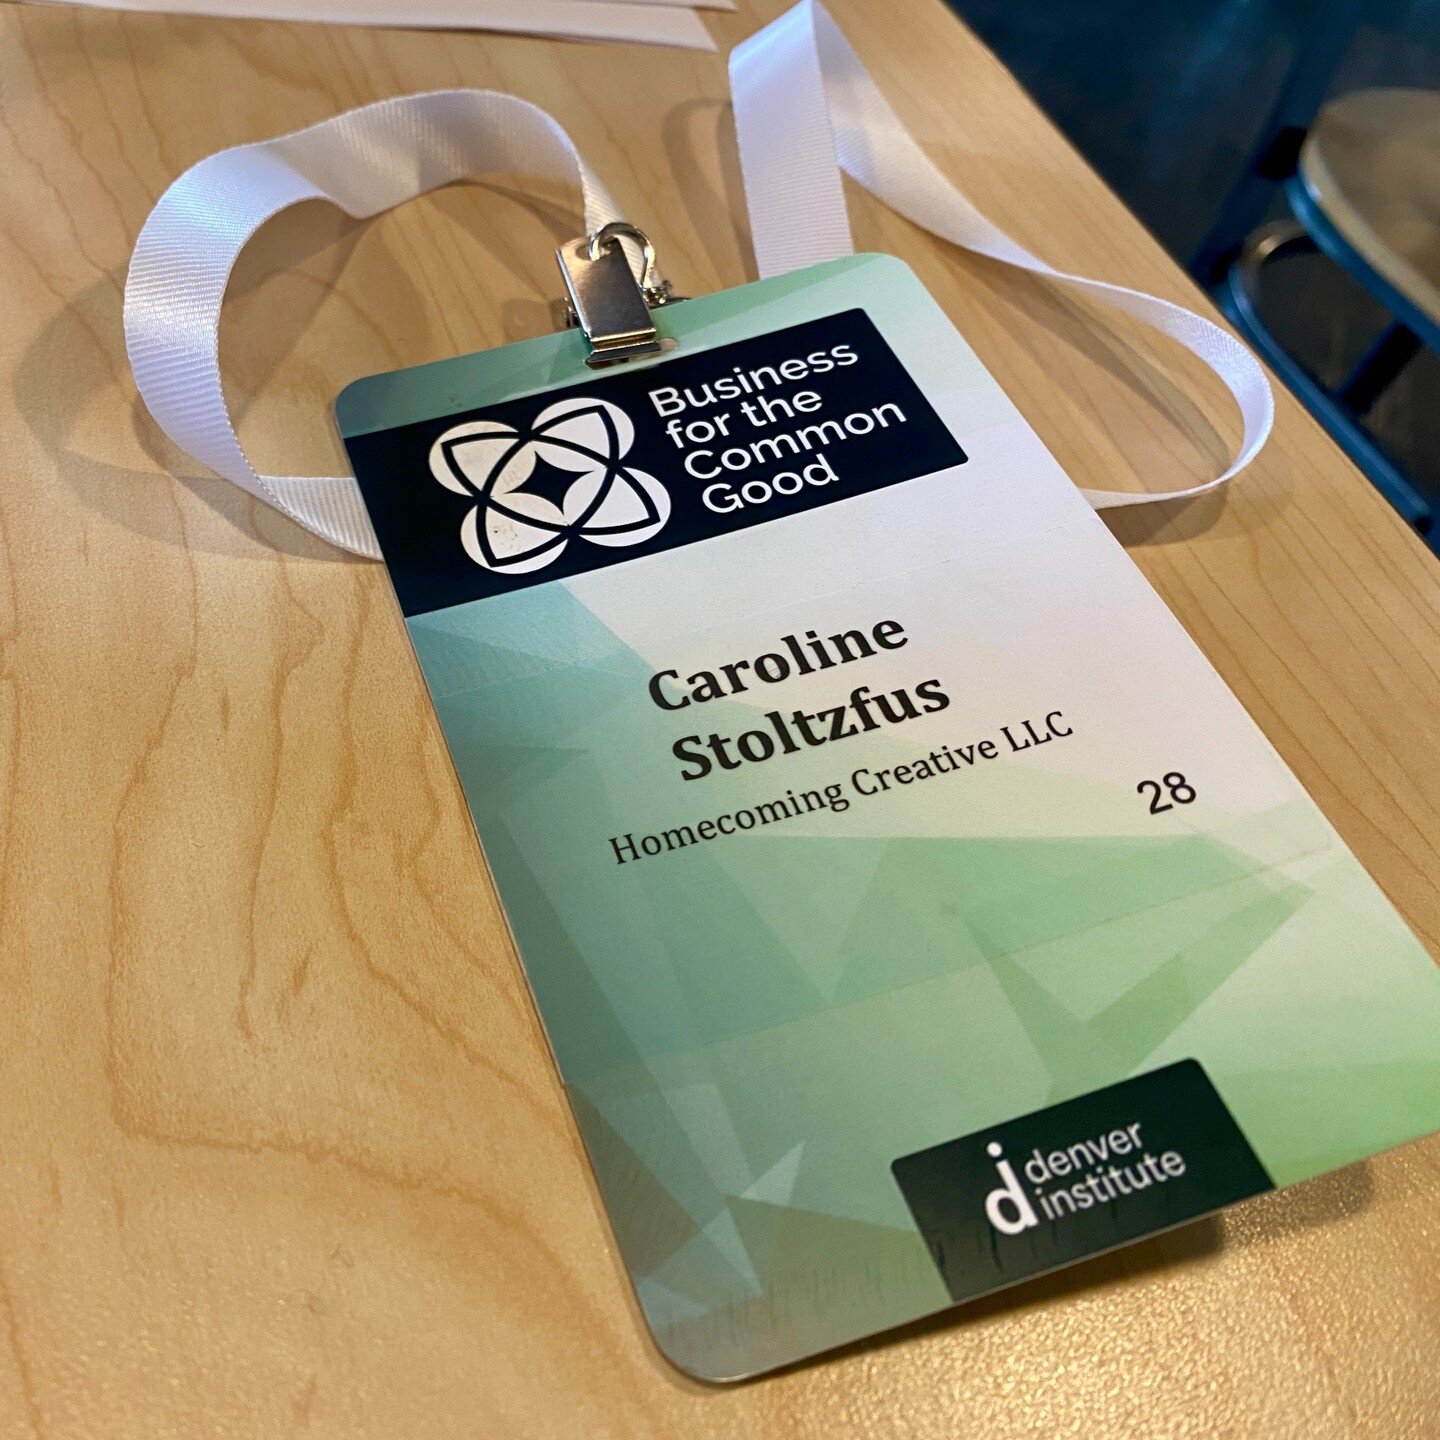 Starting this week refreshed by the good words from @denverinstitute Business for the Common Good Conference last week!

My number one takeaway: As a person of faith, working for the common good requires skillfully and thoughtfully making decisions t